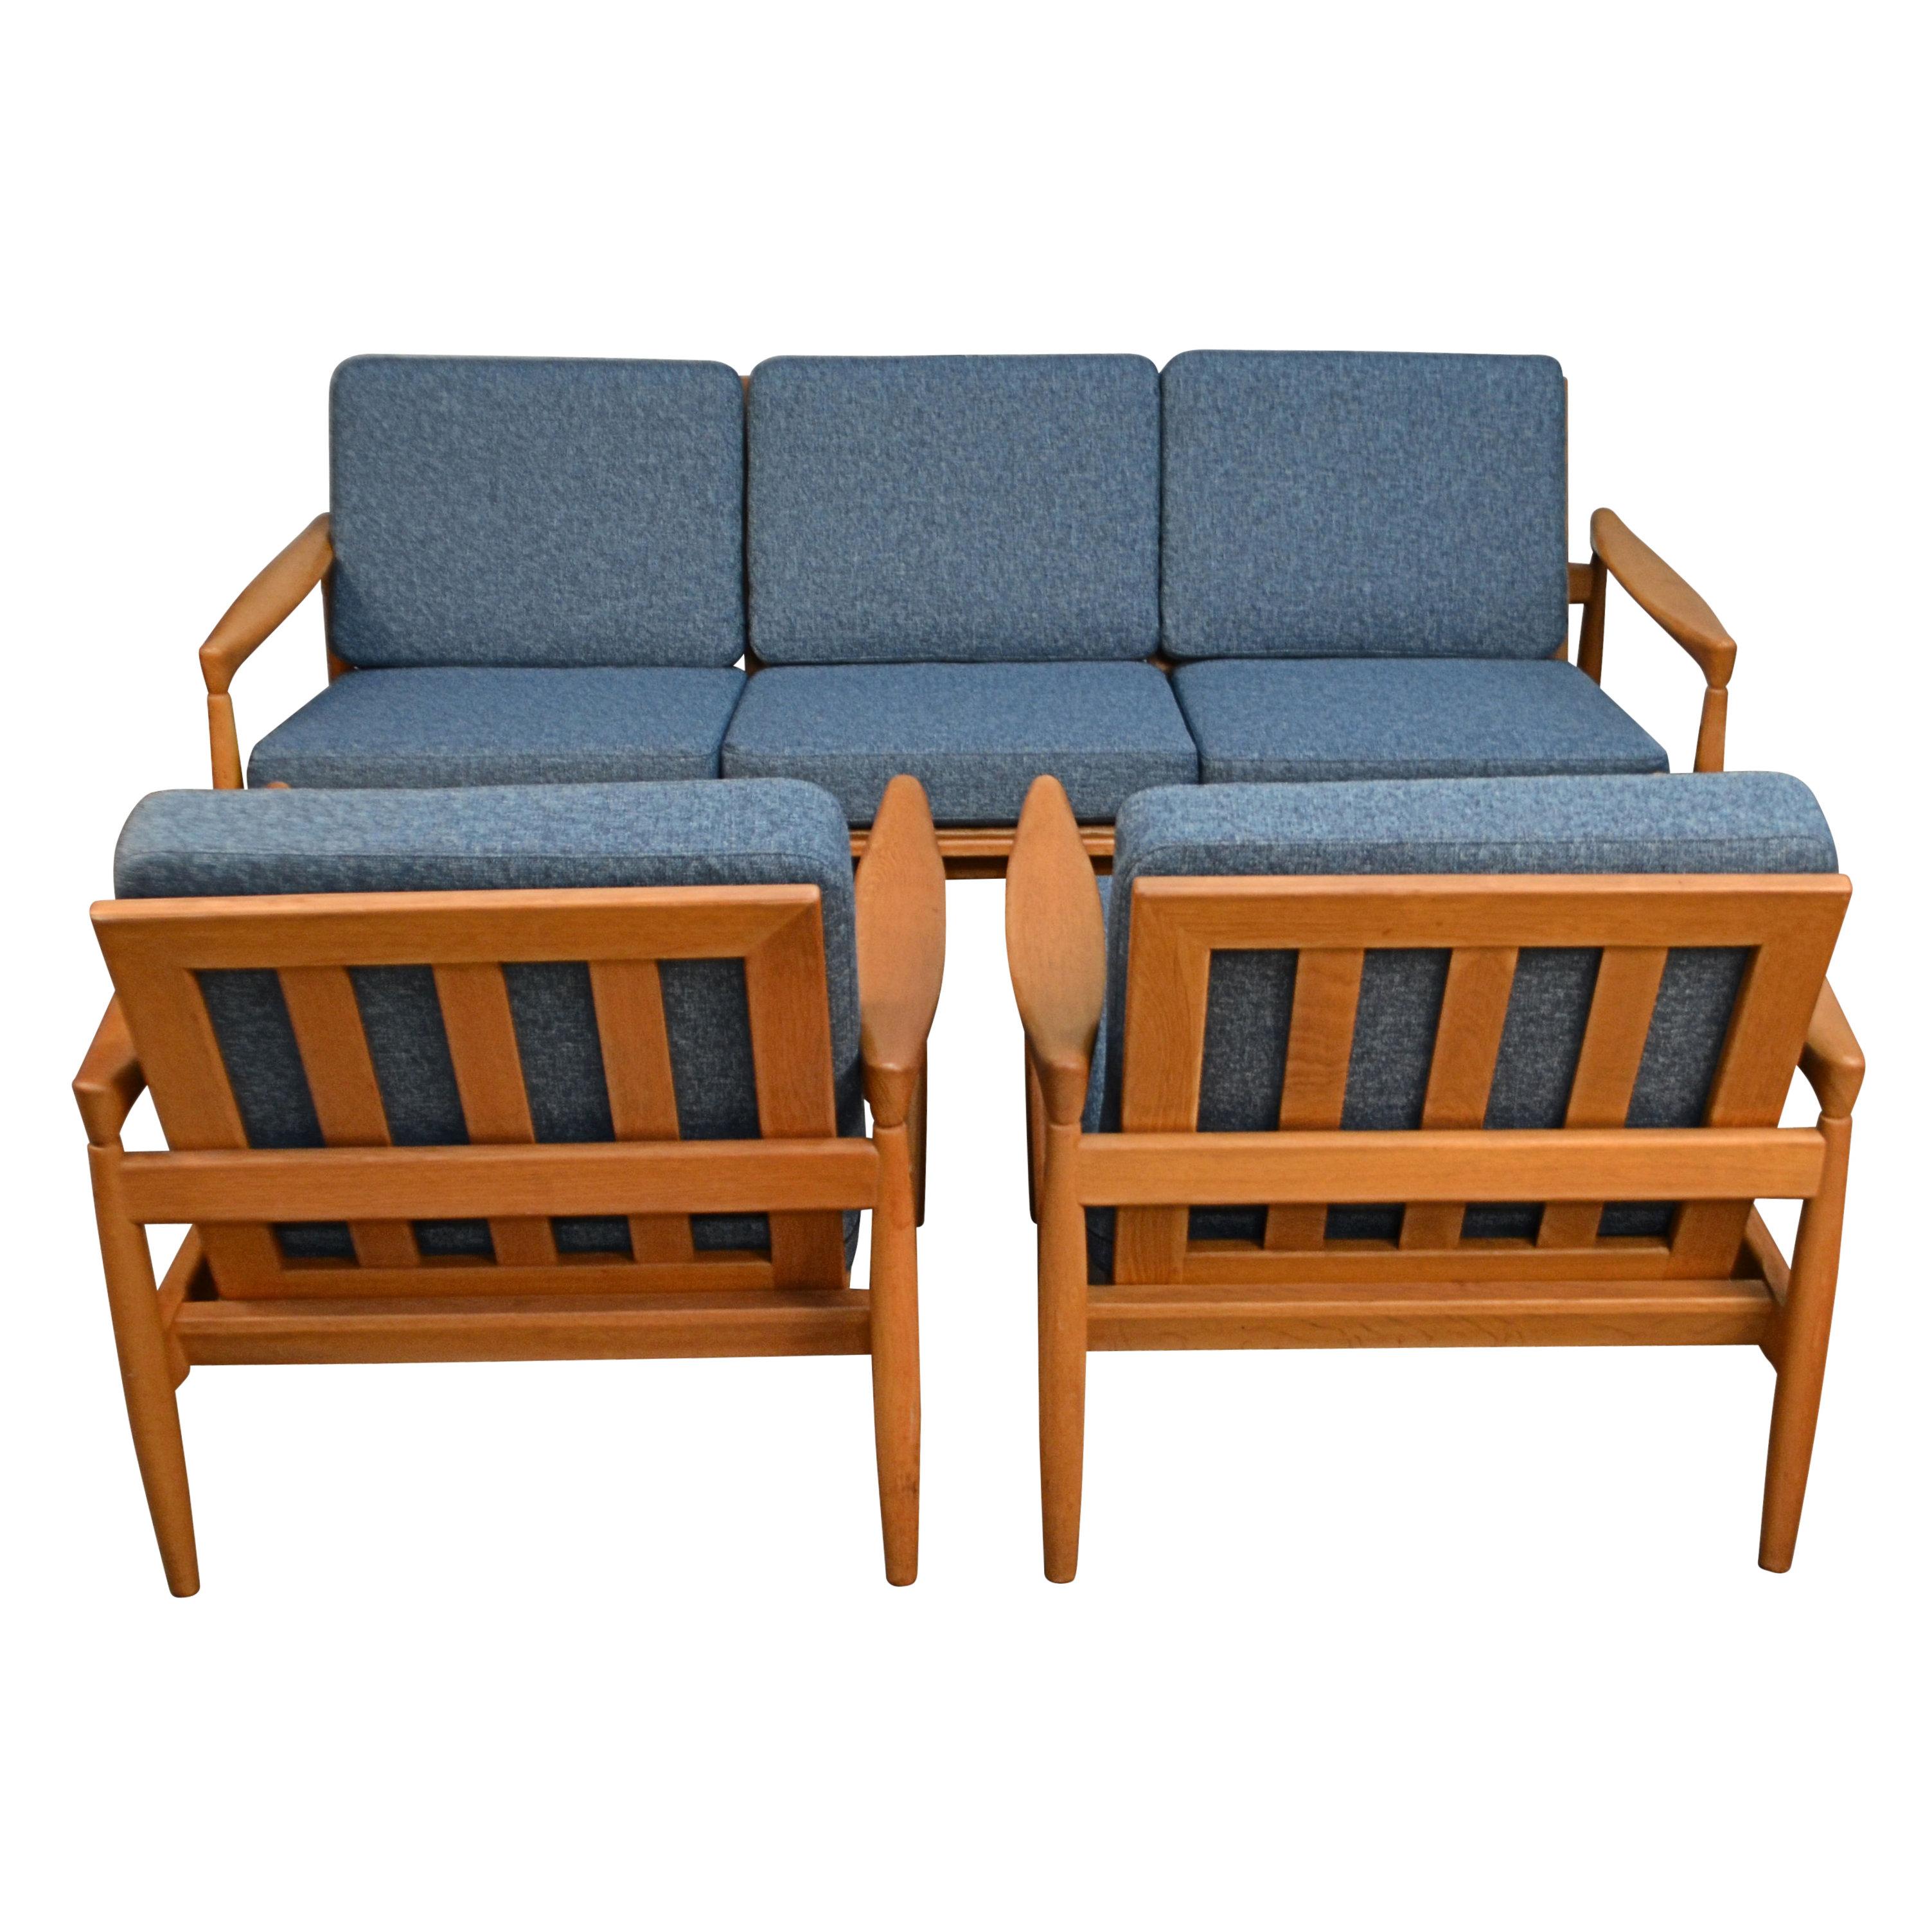 Vintage oak seating group model Kolding consisting out of a three-seater sofa and two lounge chairs. Designed and manufactured by Danish designer Erik Wørts. The organic clear lines and the gorgeous oak wood make for a typical vintage Danish design.